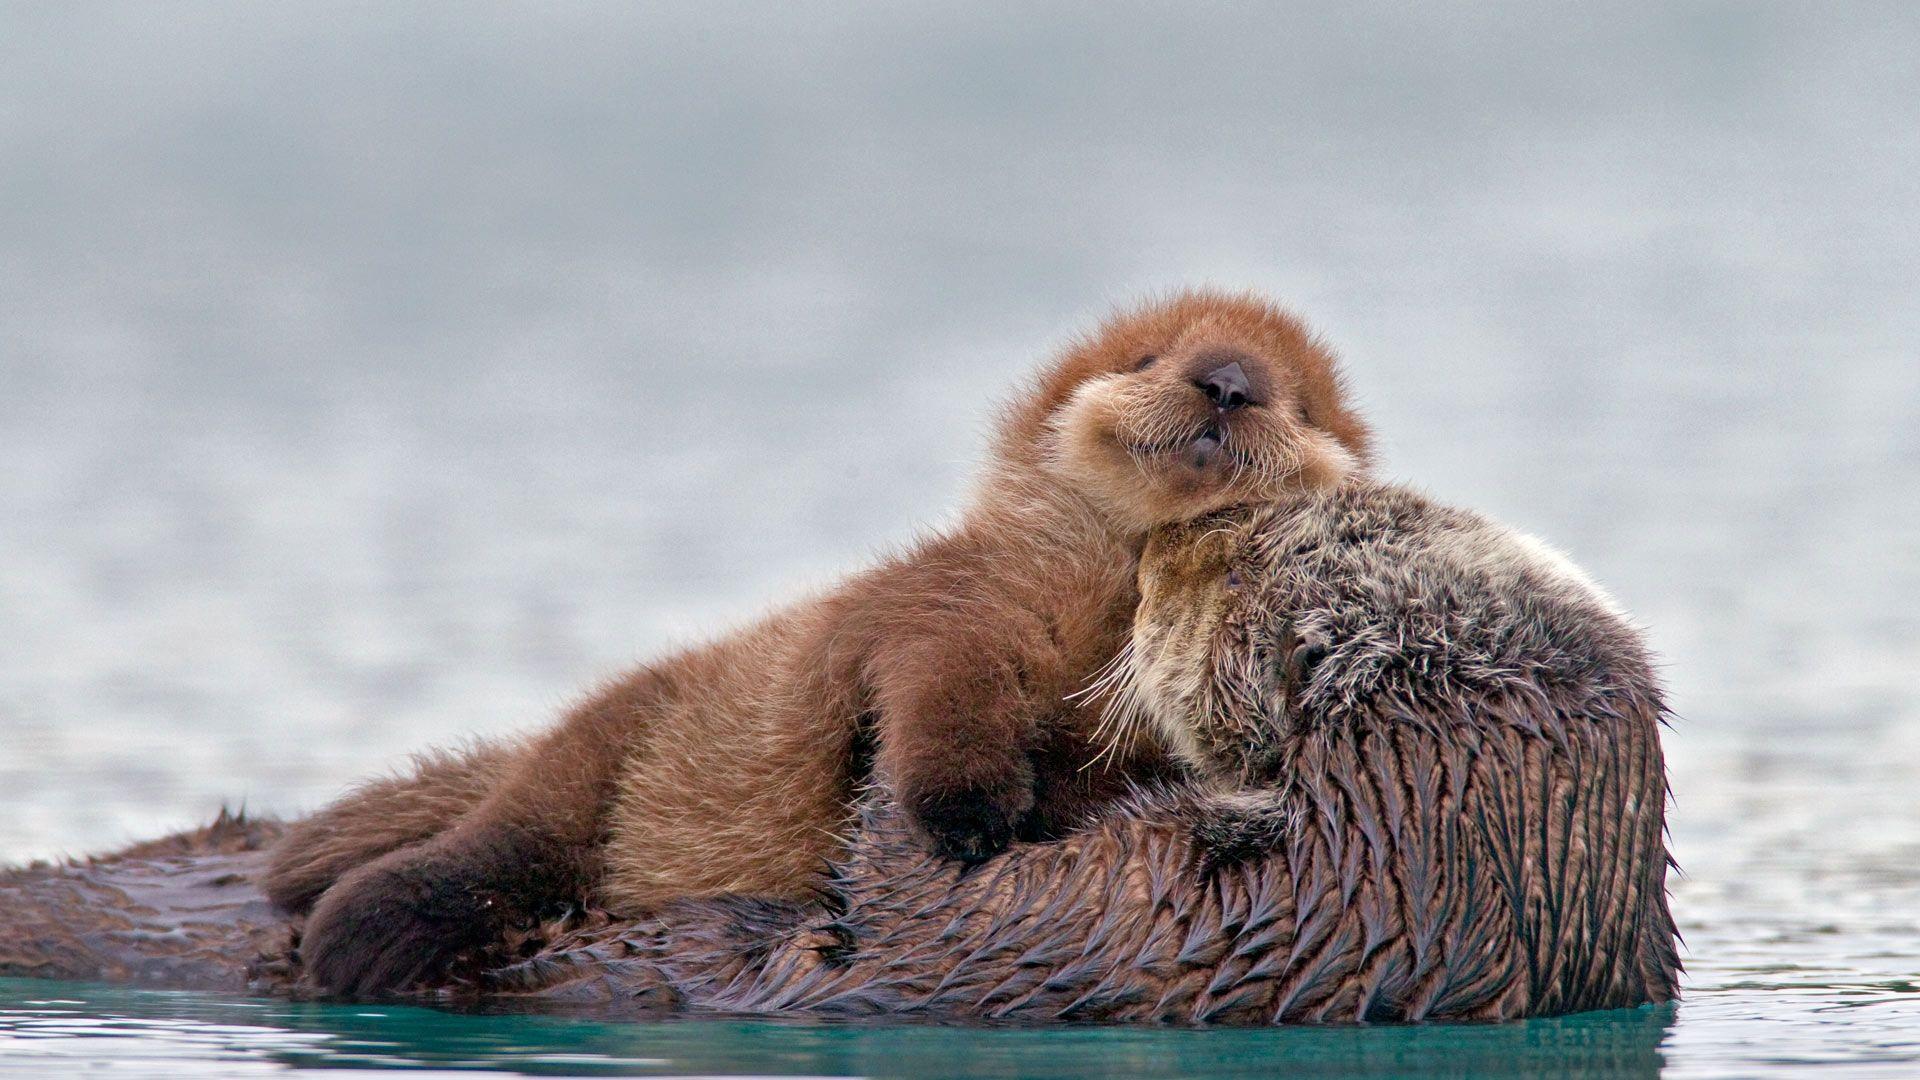 Bing Image Archive: Sea otter with pup, Prince William Sound, Alaska